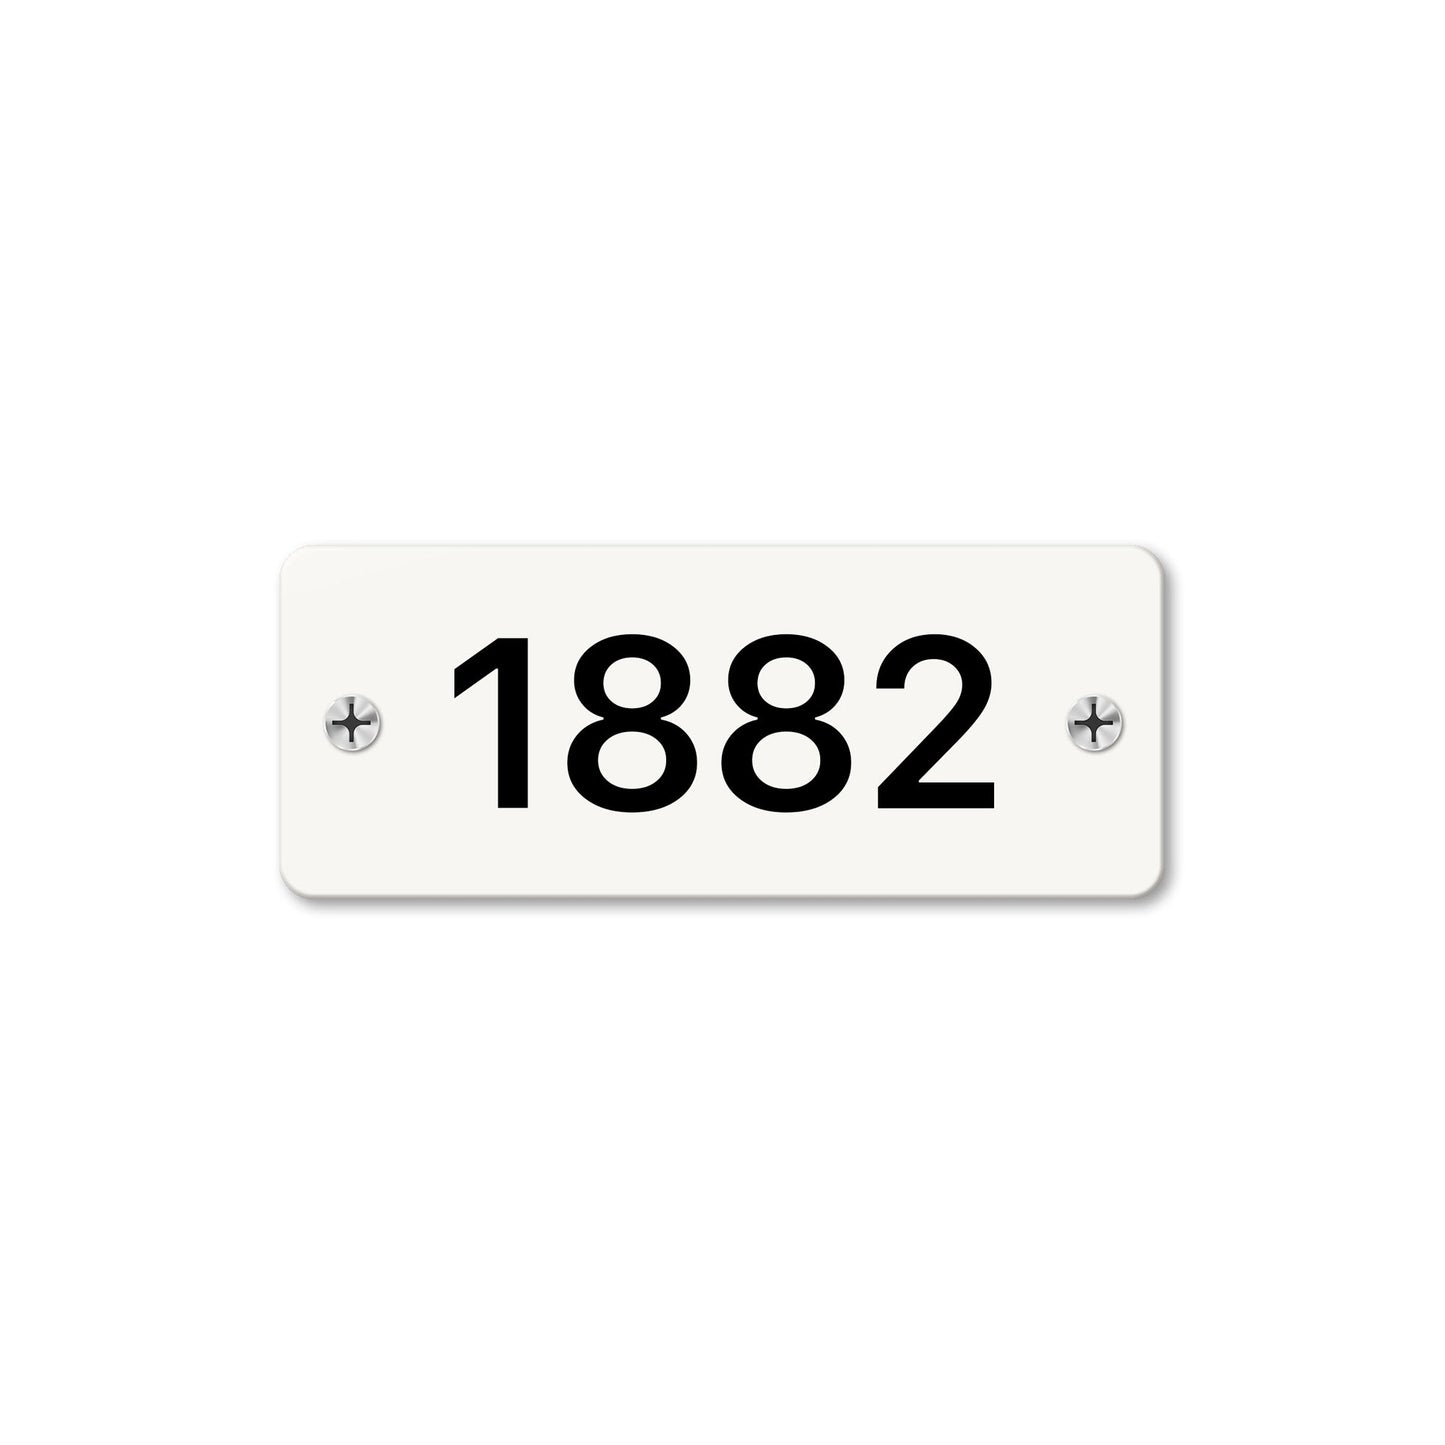 Numeral 1882